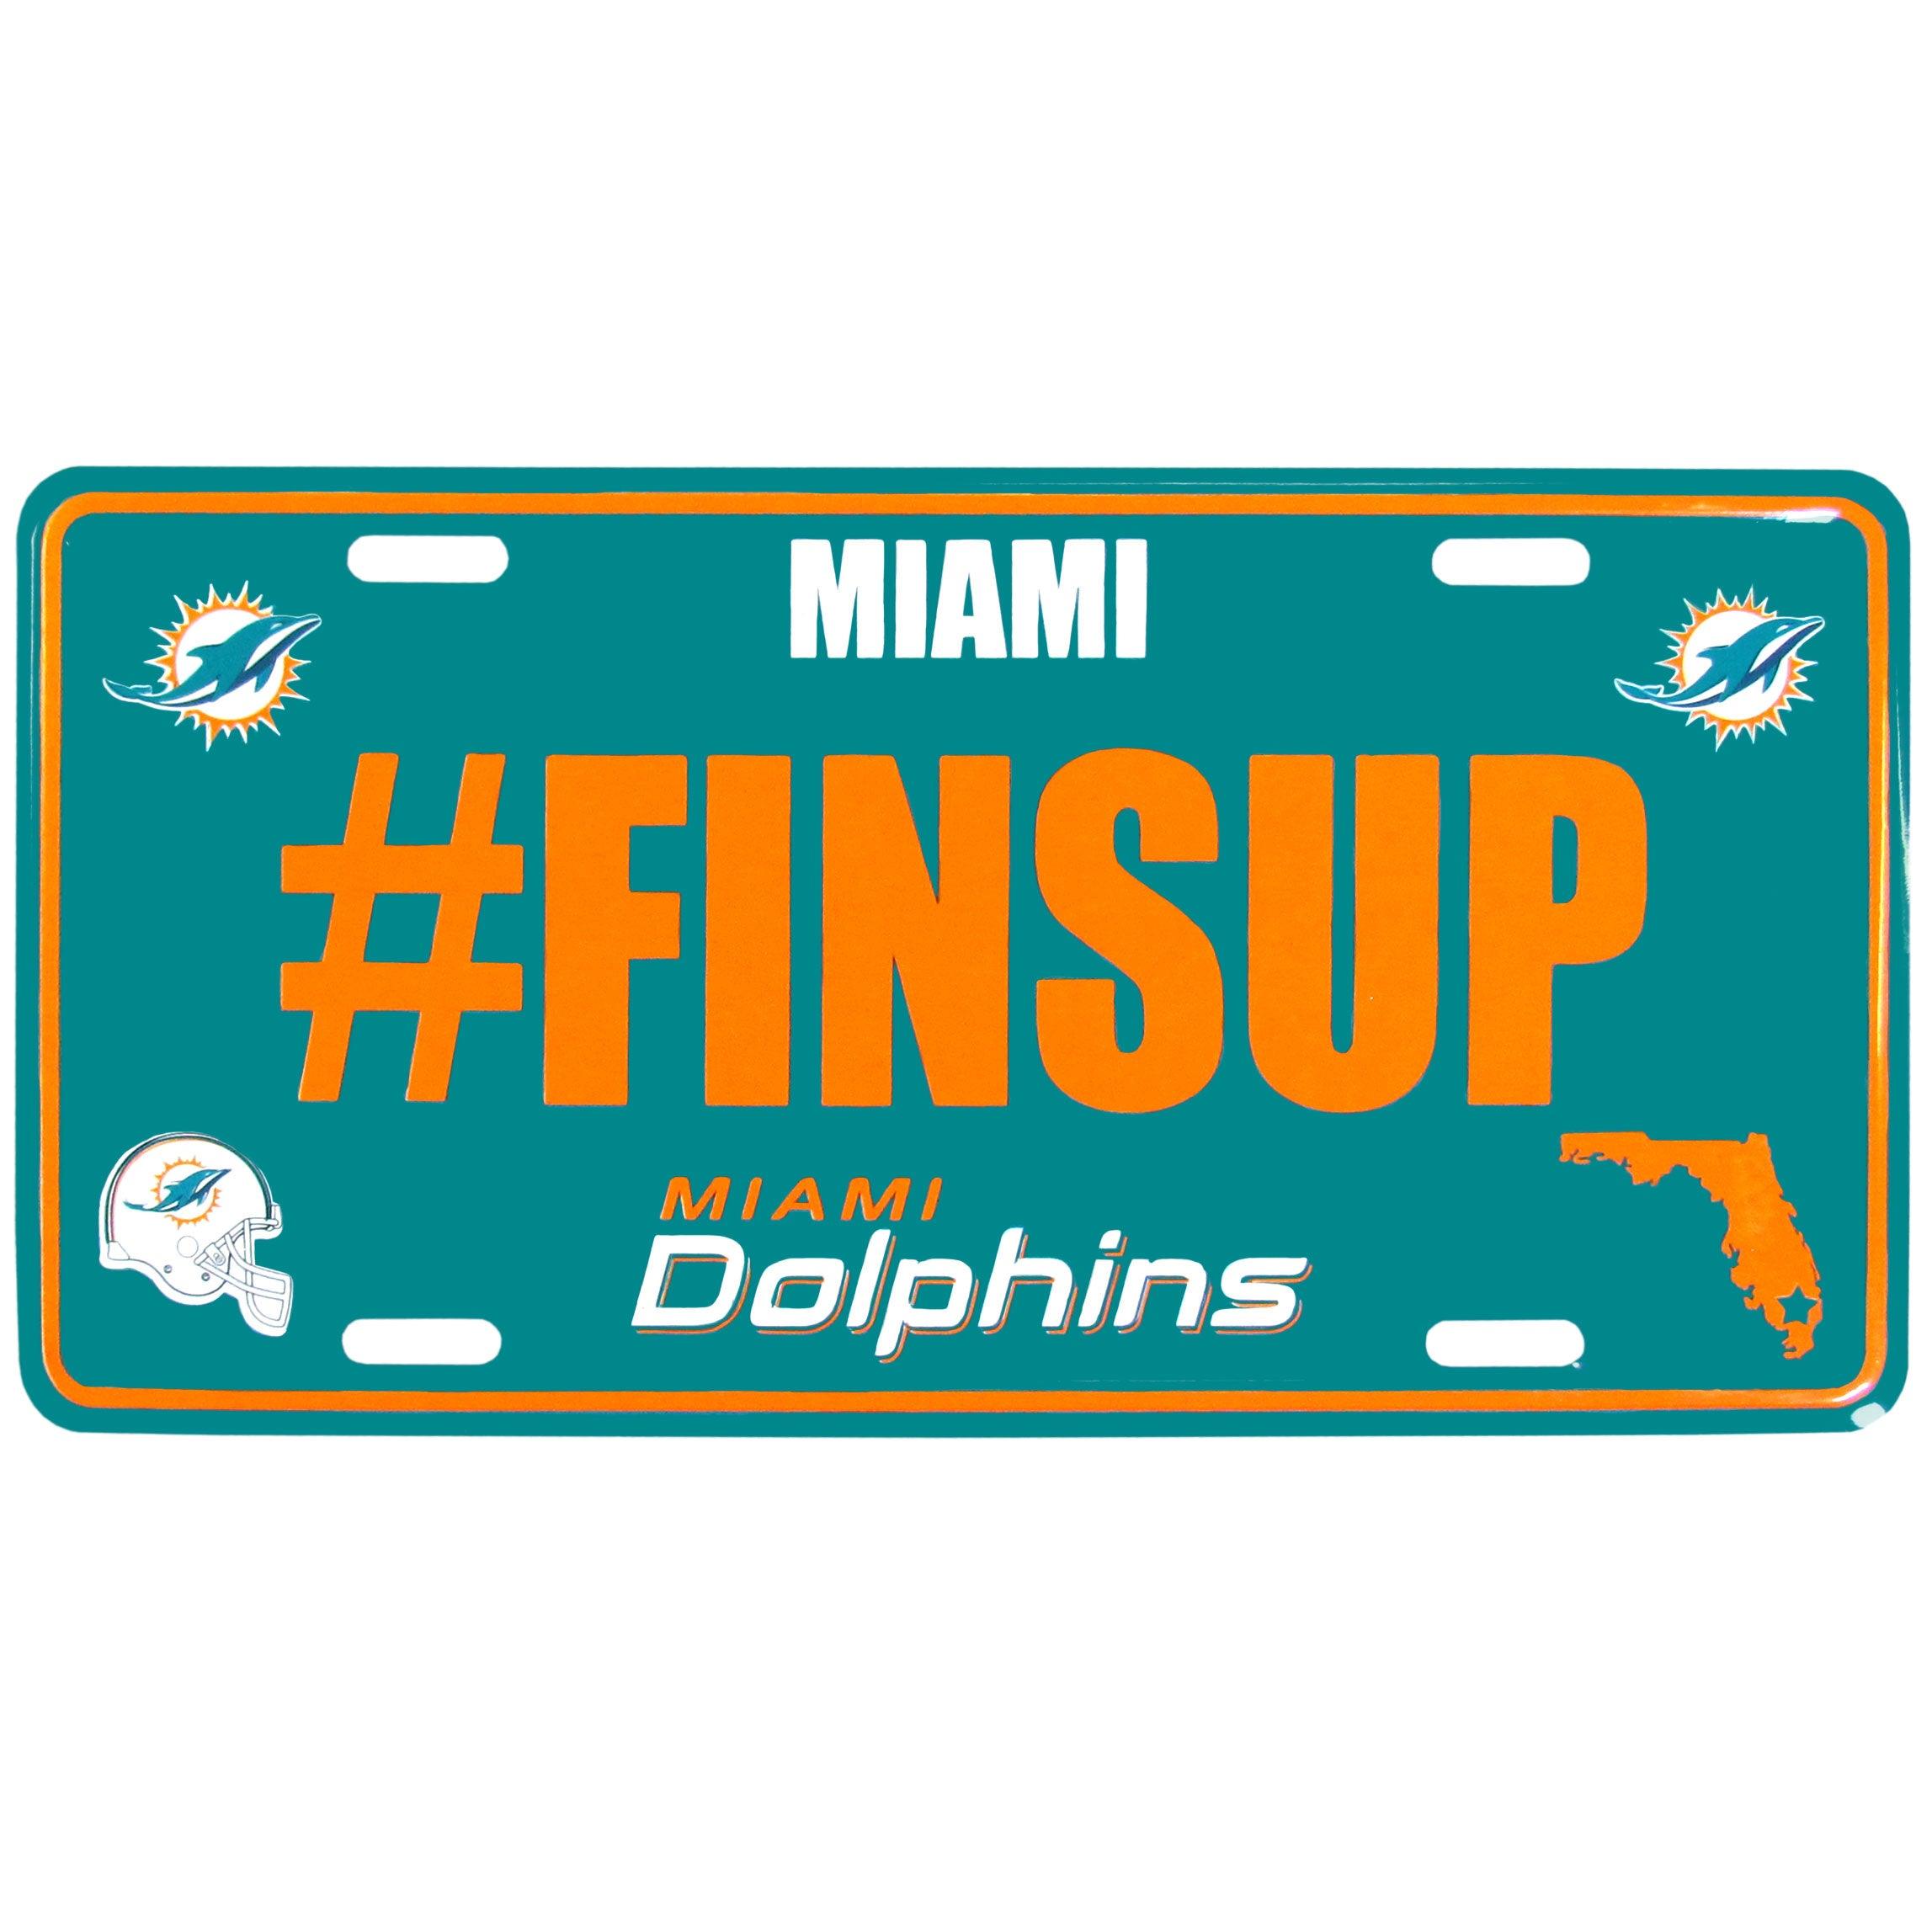 Miami Dolphins Hashtag License Plate - Flyclothing LLC